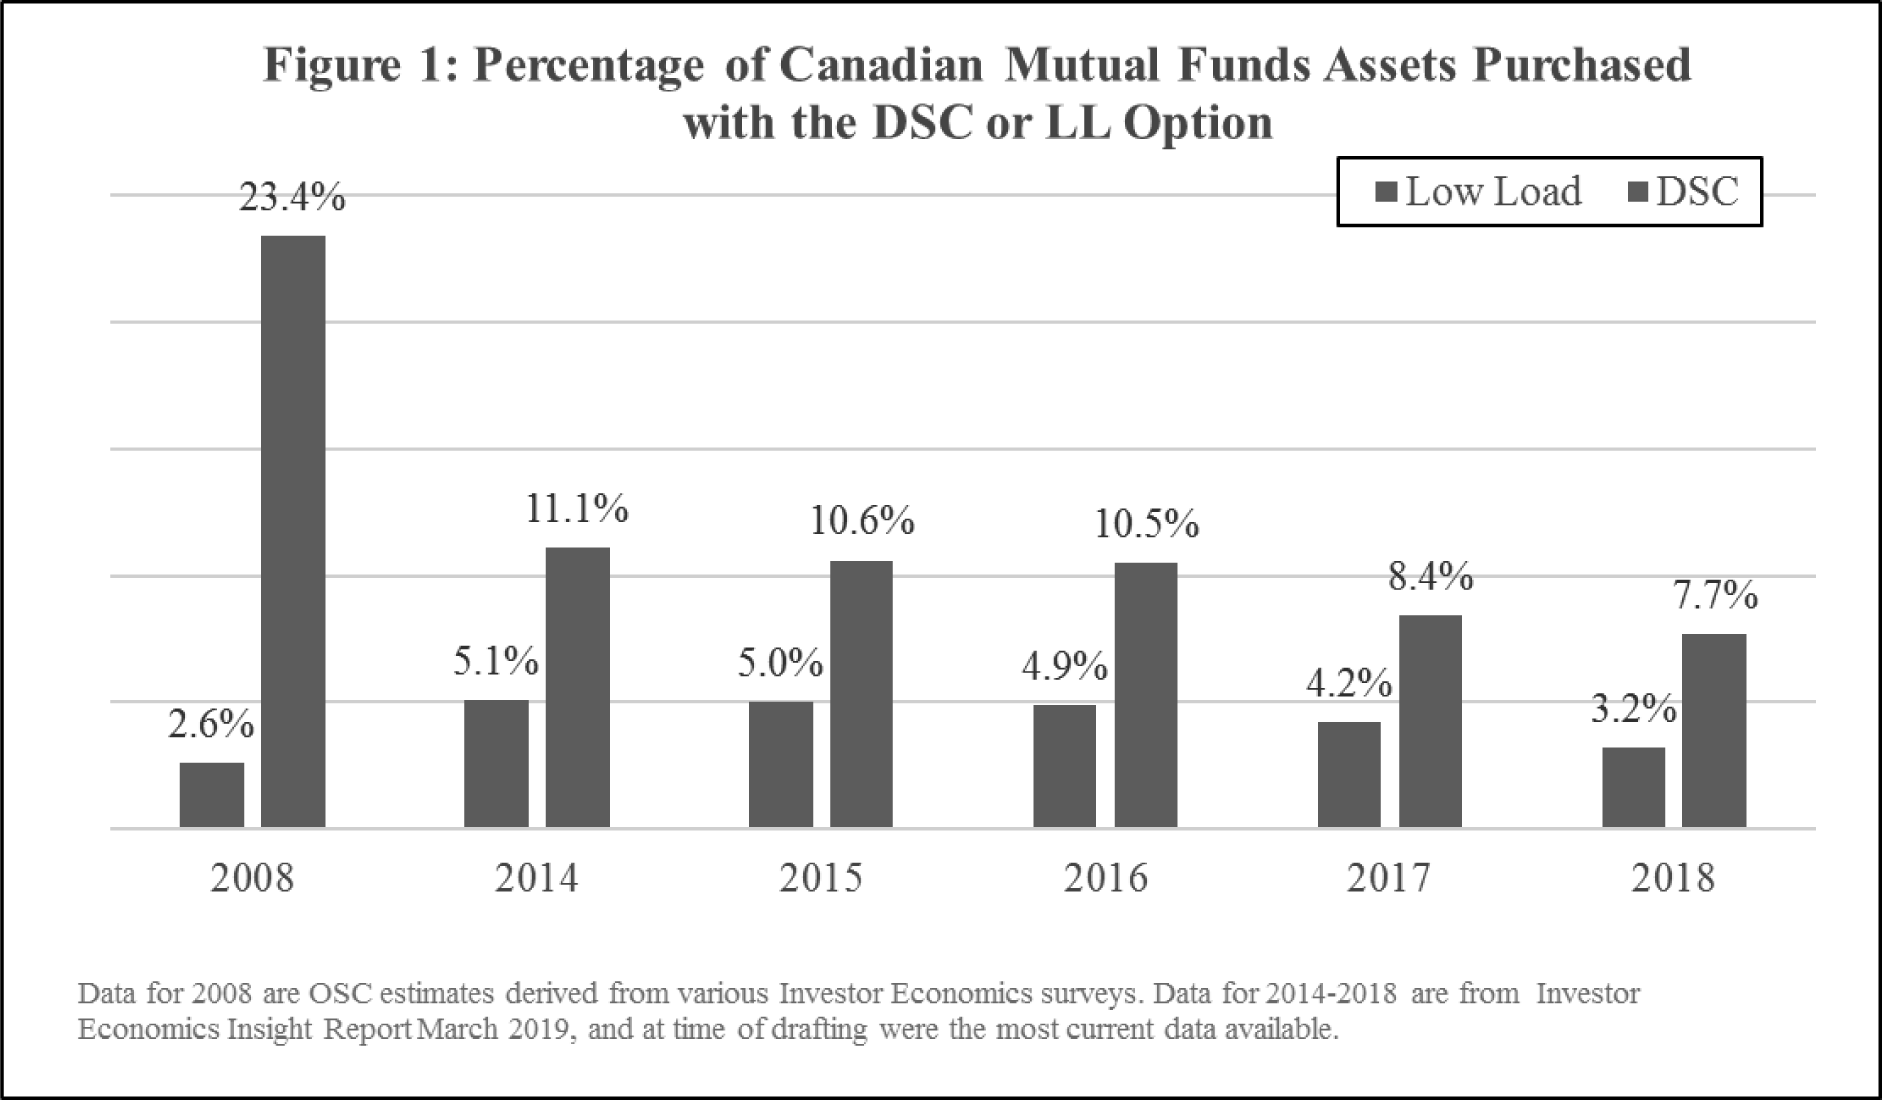 Figure 1: Percentage of Canadian Mutual Funds Assets Purchased with the DSC or LL Option